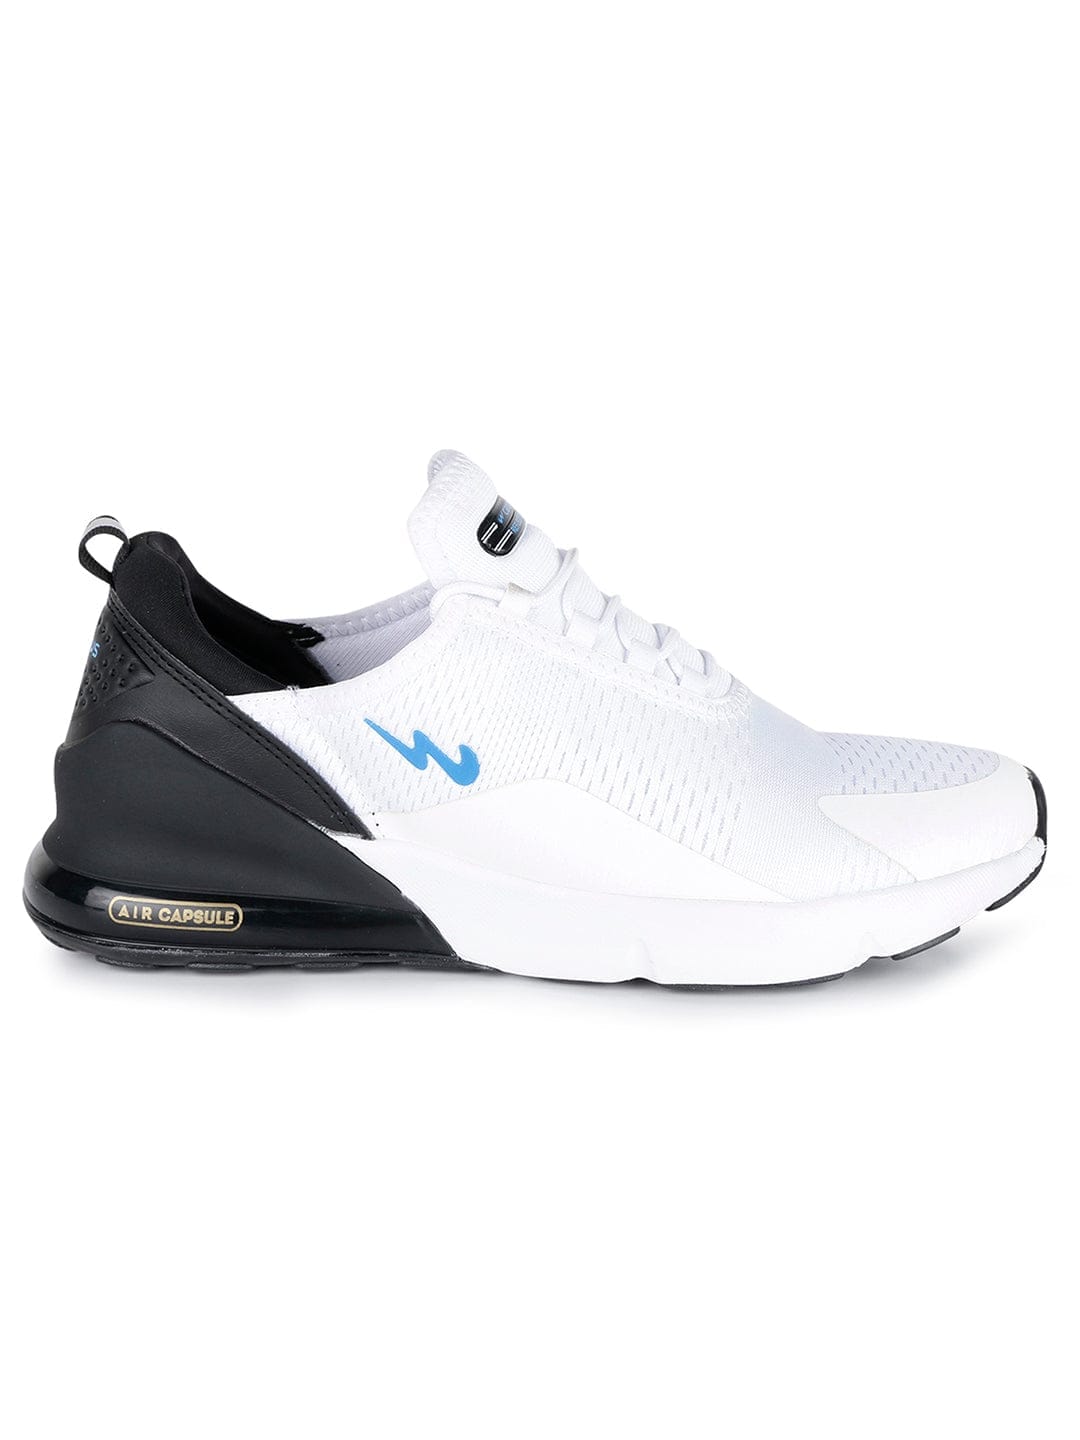 Buy Running Shoes For Men: Mike-N-Gry-D-Gry | Campus Shoes